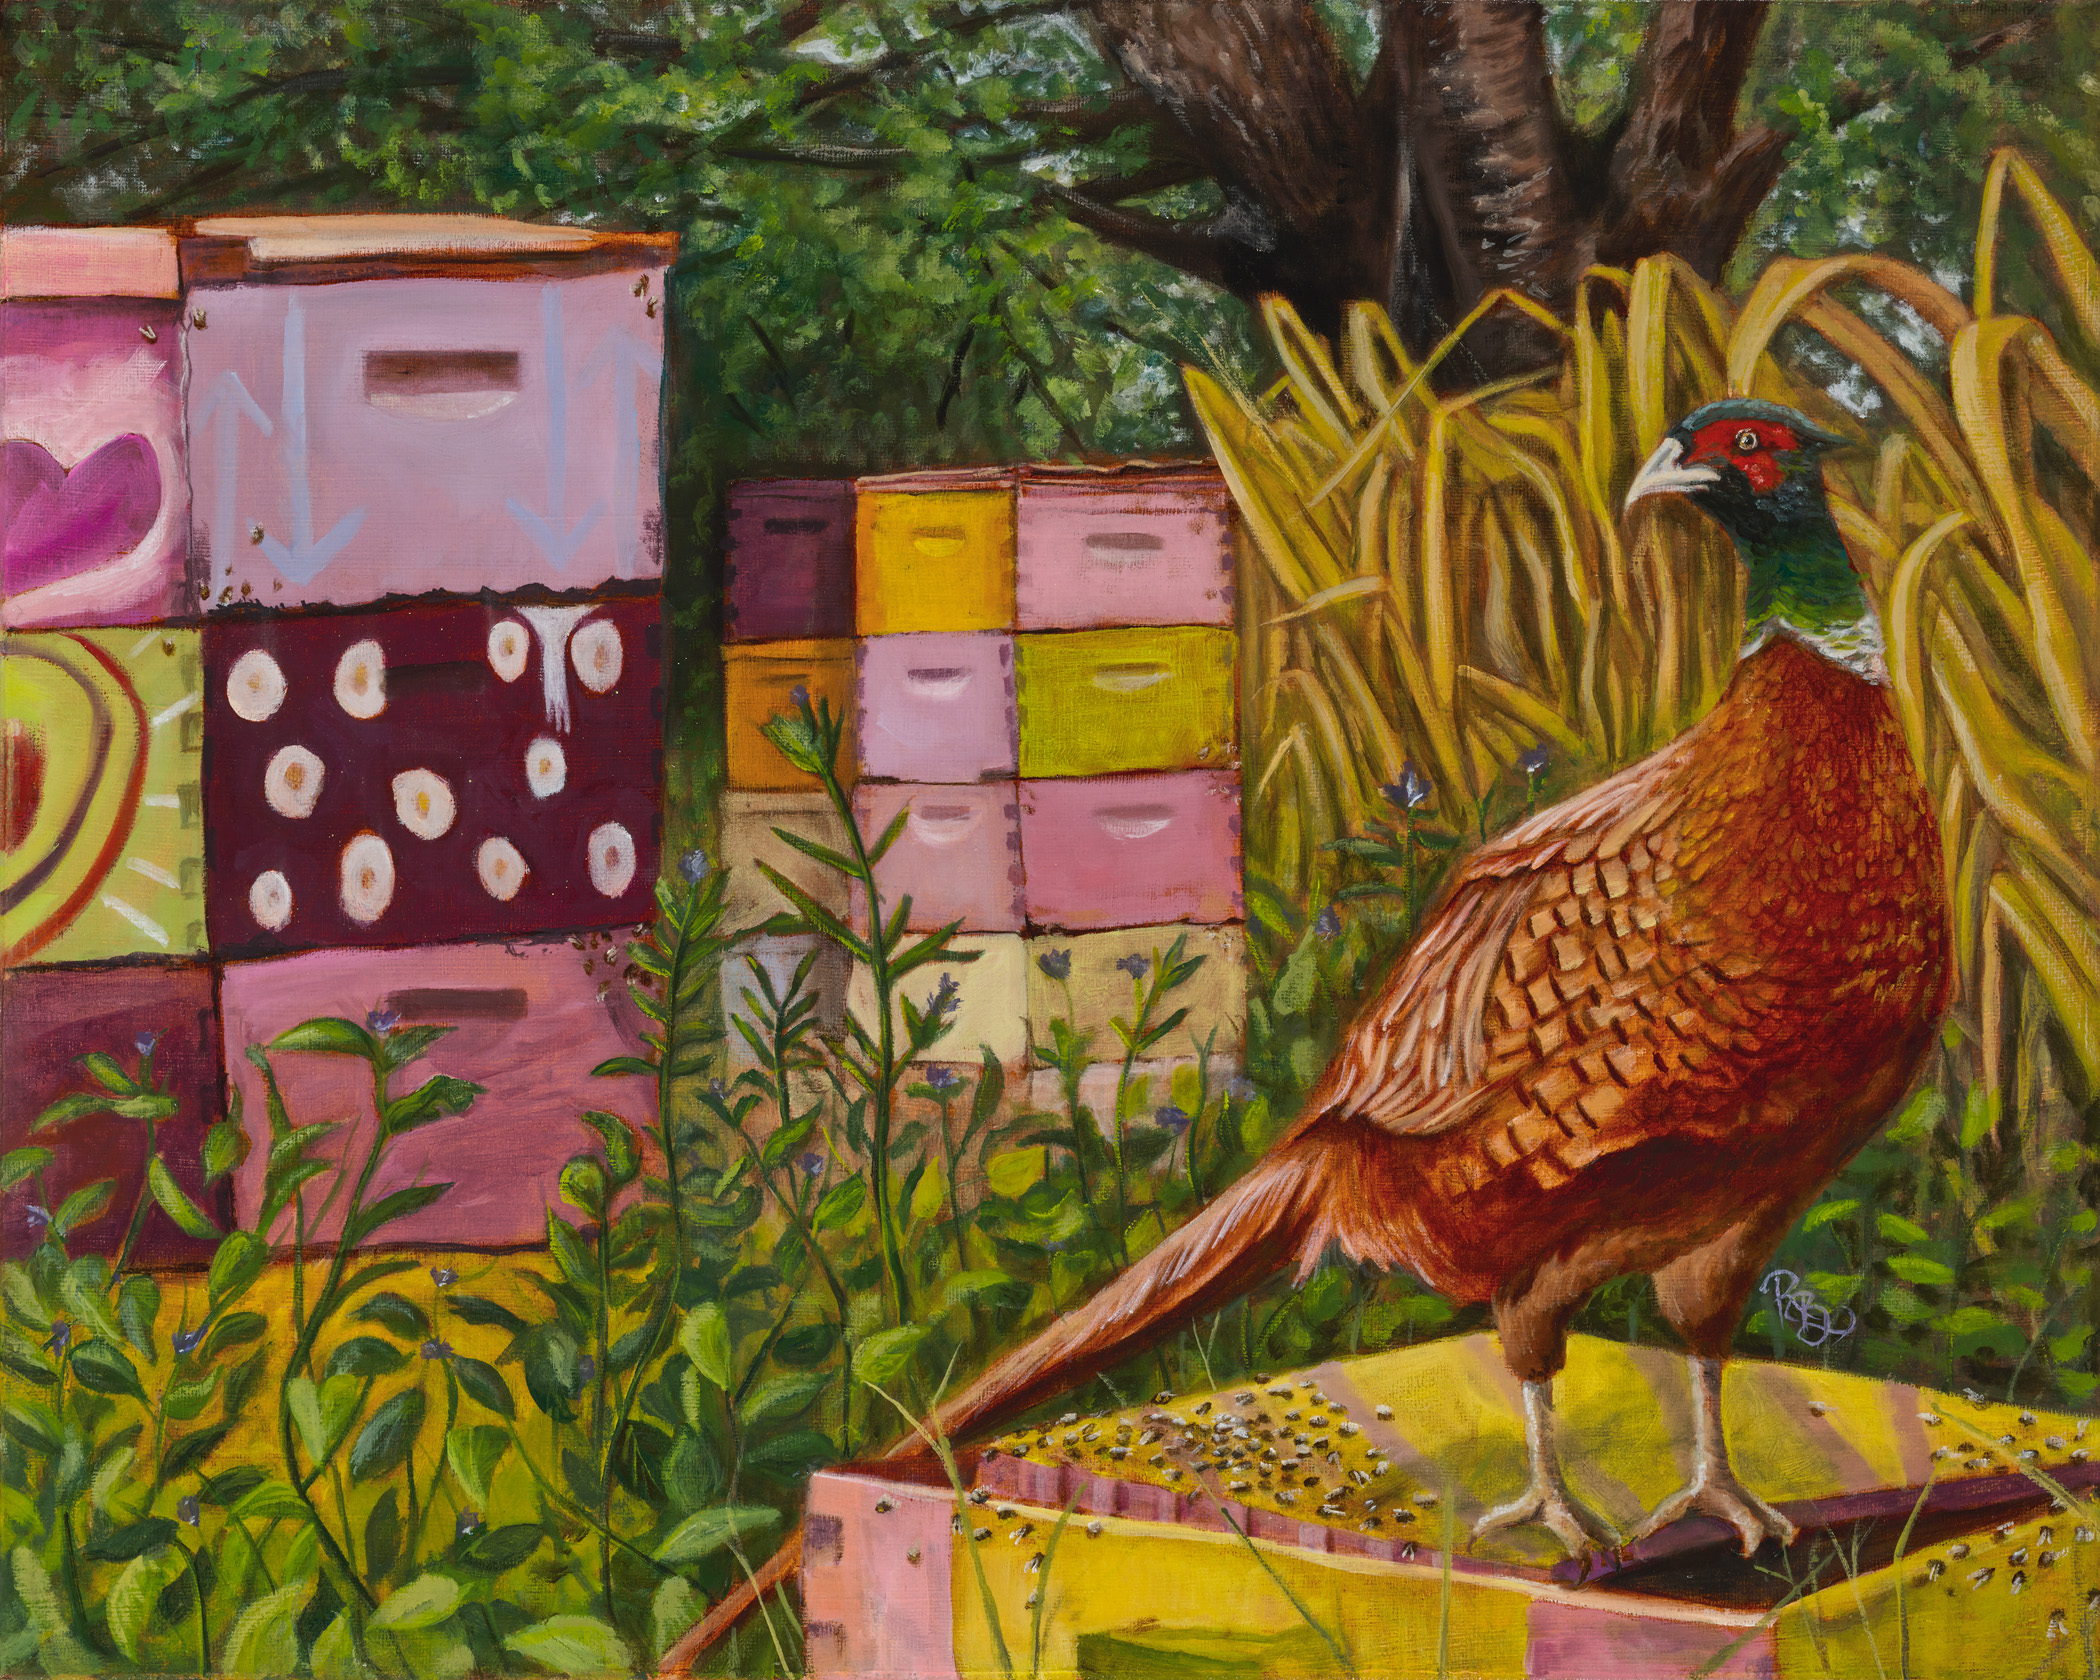 A pheasant stands on top of a pink and yellow painted apiary box covered in bees. In the background stacks of colorfully painted are stacked 3 to 4 high with various patterns. The boxes are surround by Hawaiian native plants.